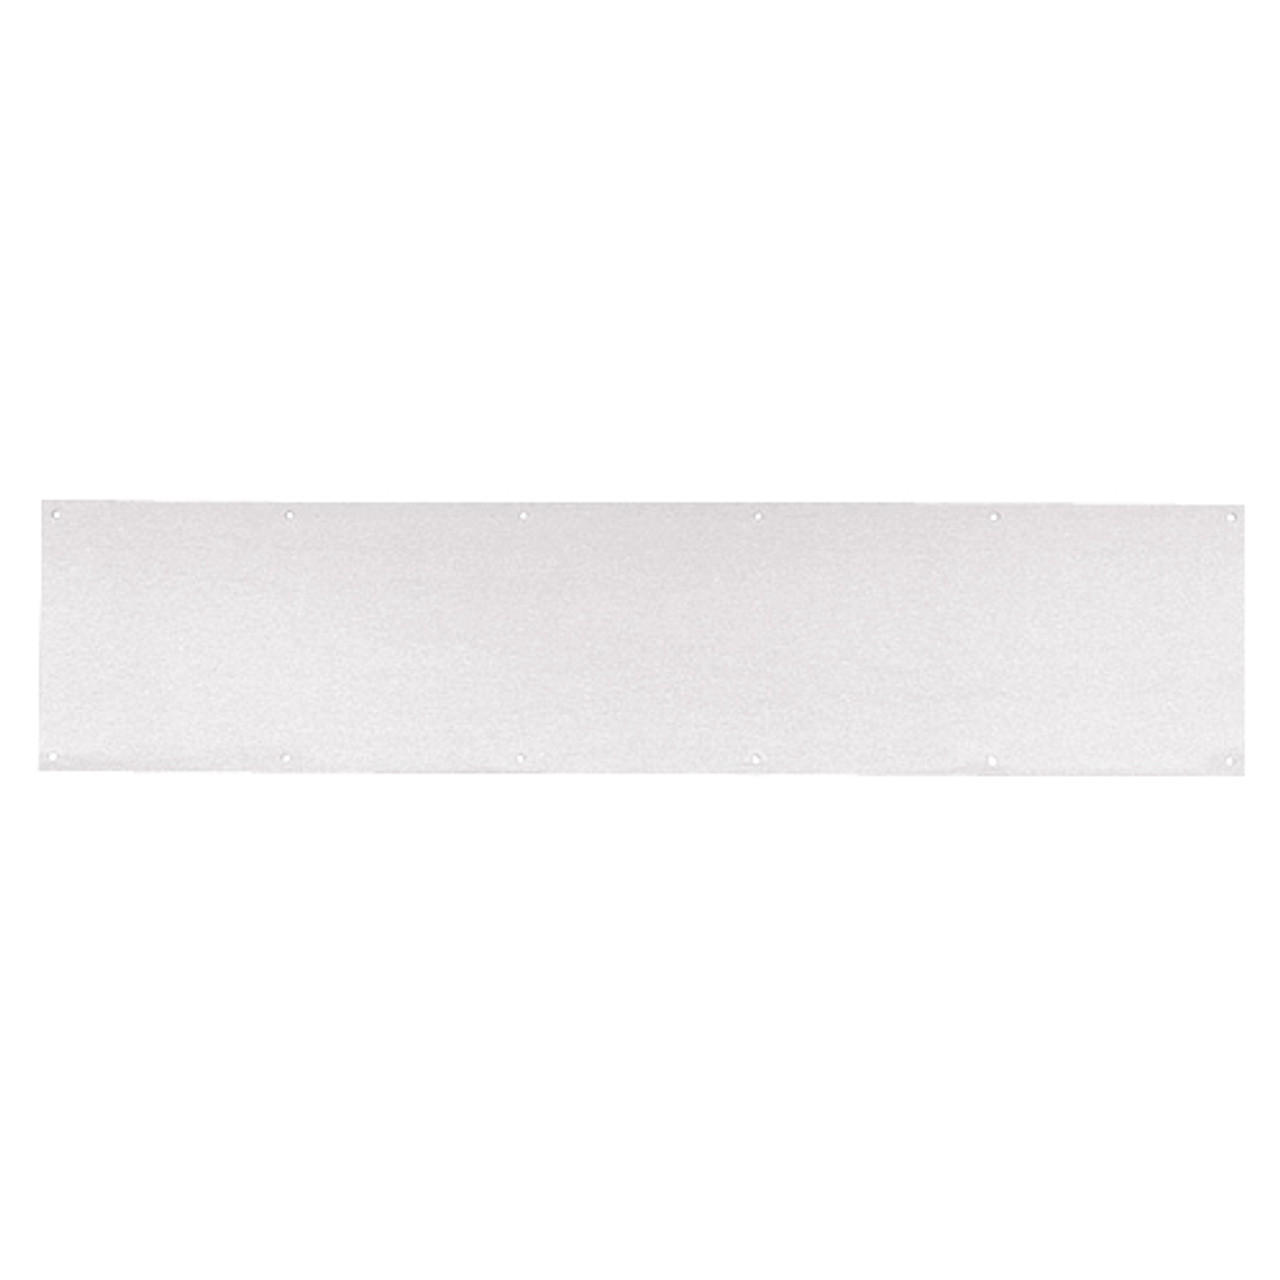 8400-US15-6x36-B-CS Ives 8400 Series Protection Plate in Satin Nickel